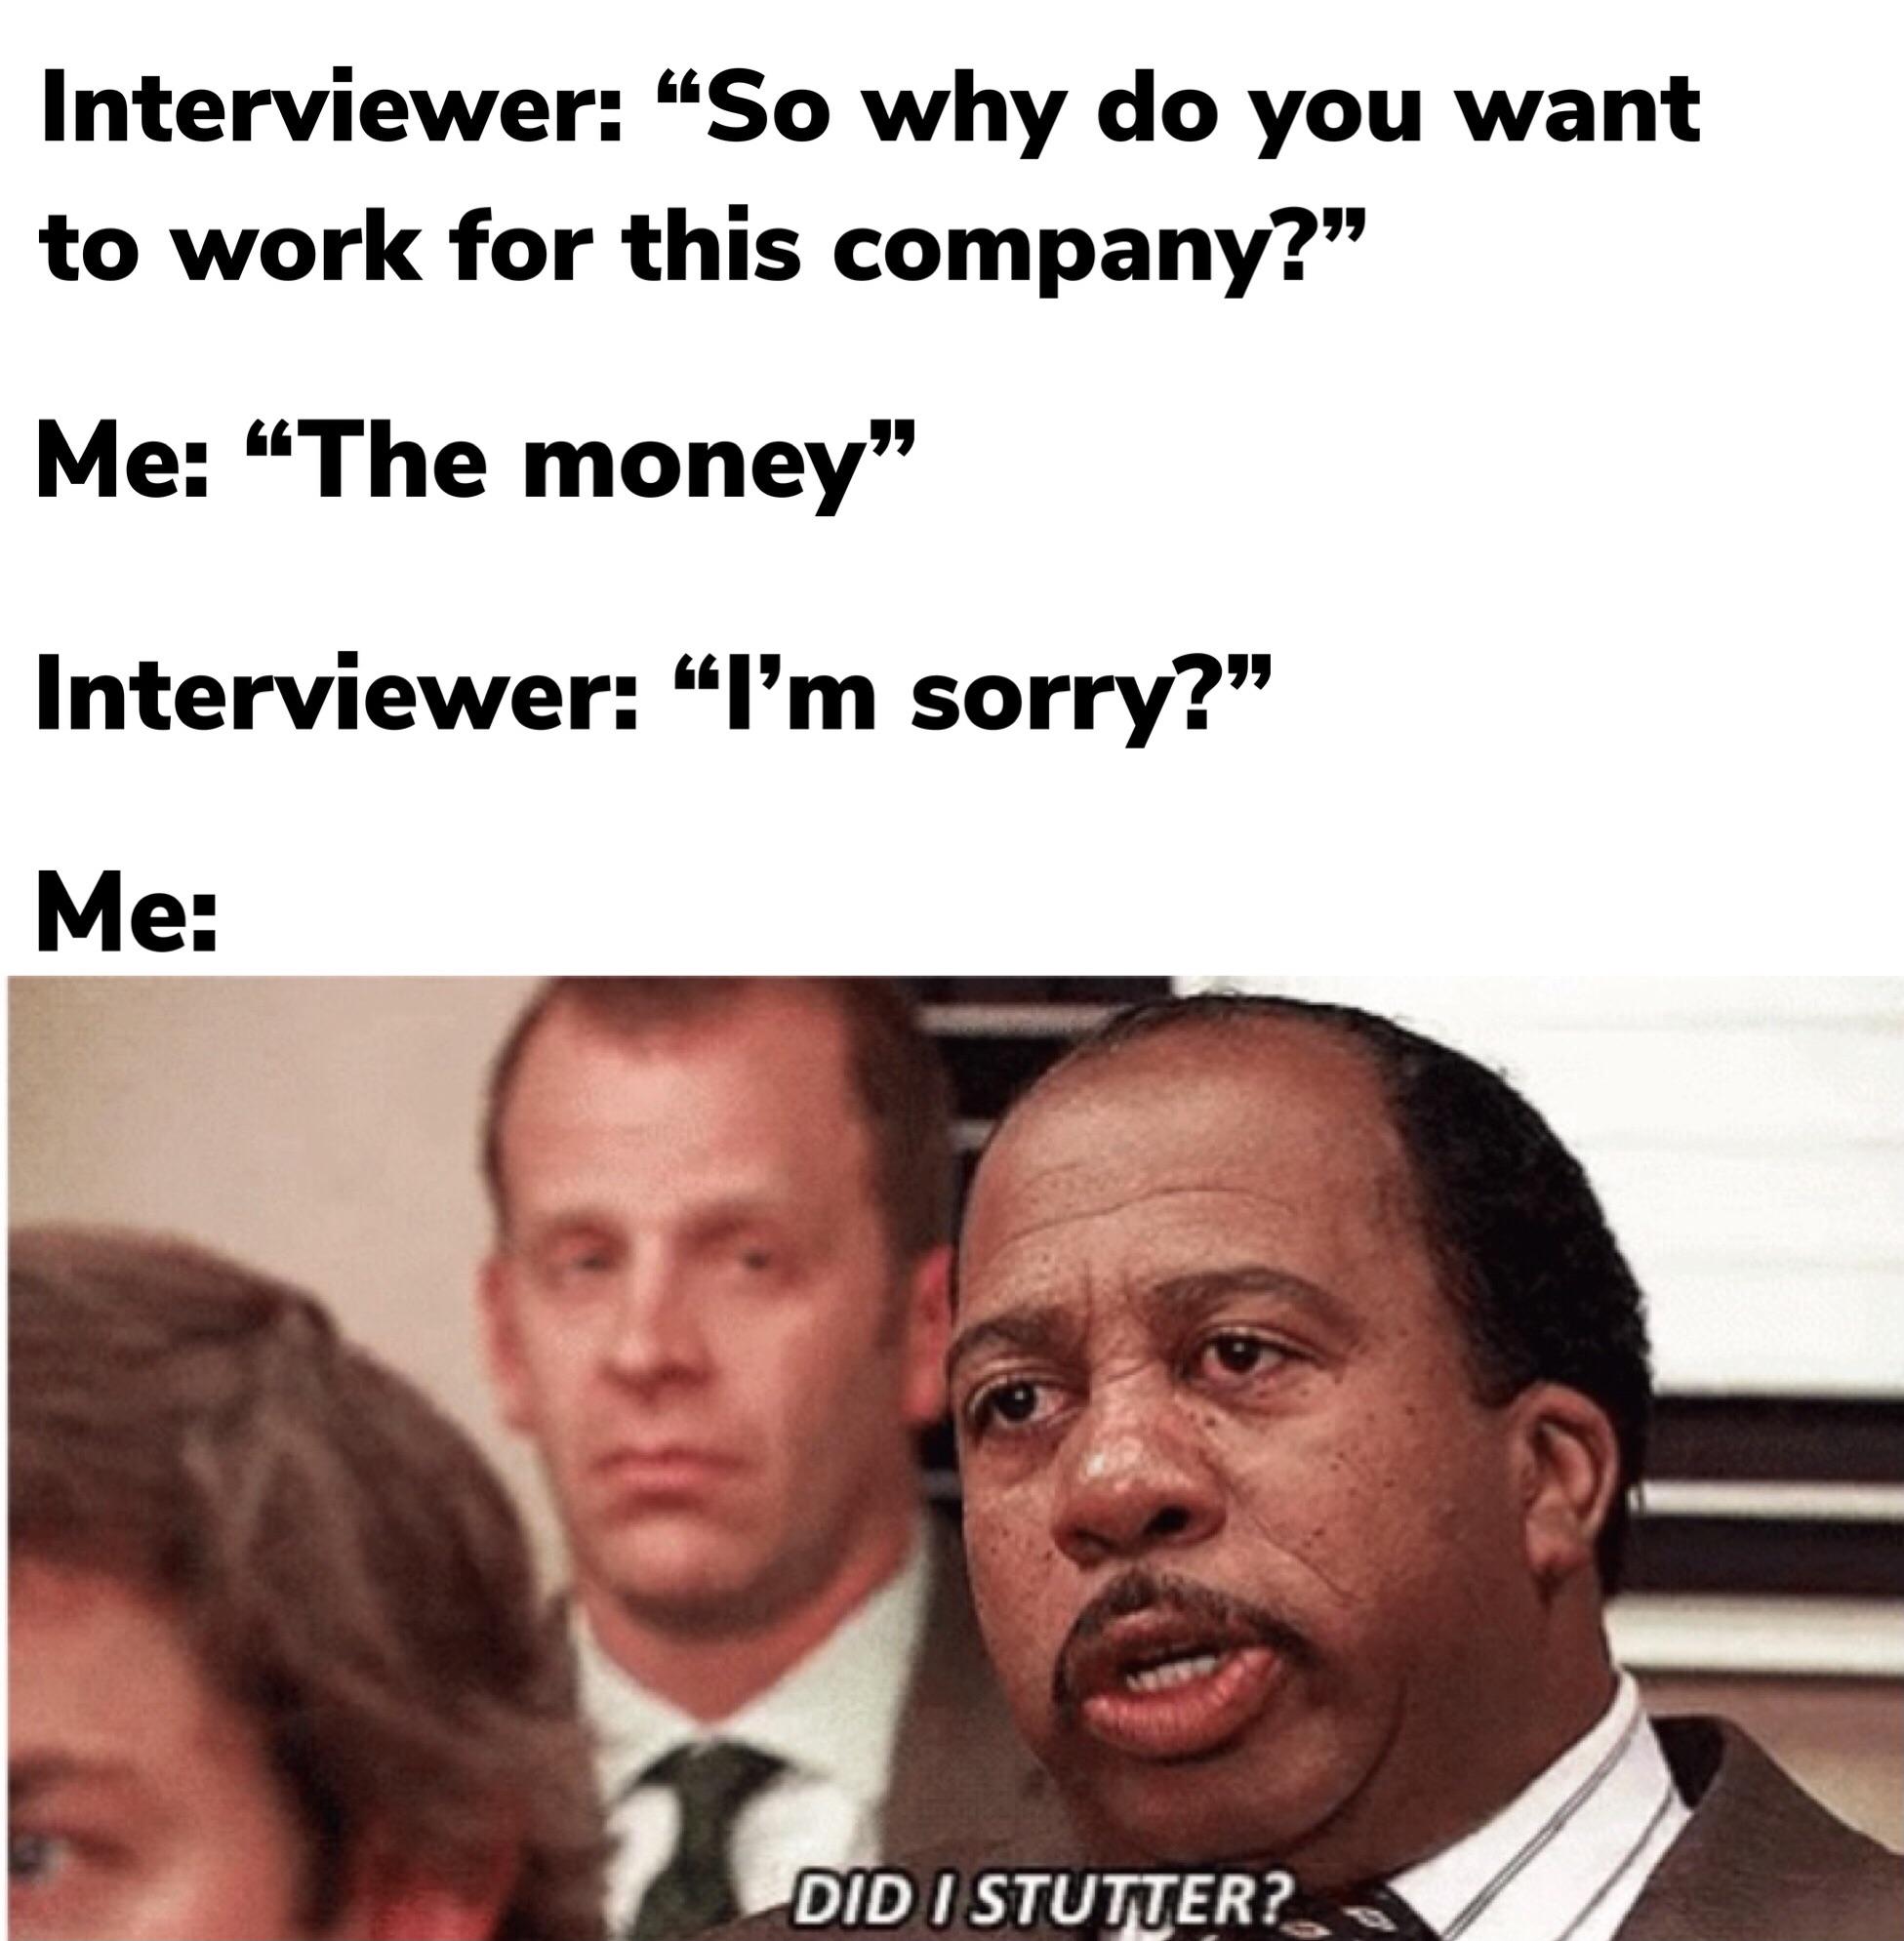 dank memes - did i stutter - Interviewer "So why do you want to work for this company?" Me The money" Interviewer "I'm sorry?" Me Did I Stutter?